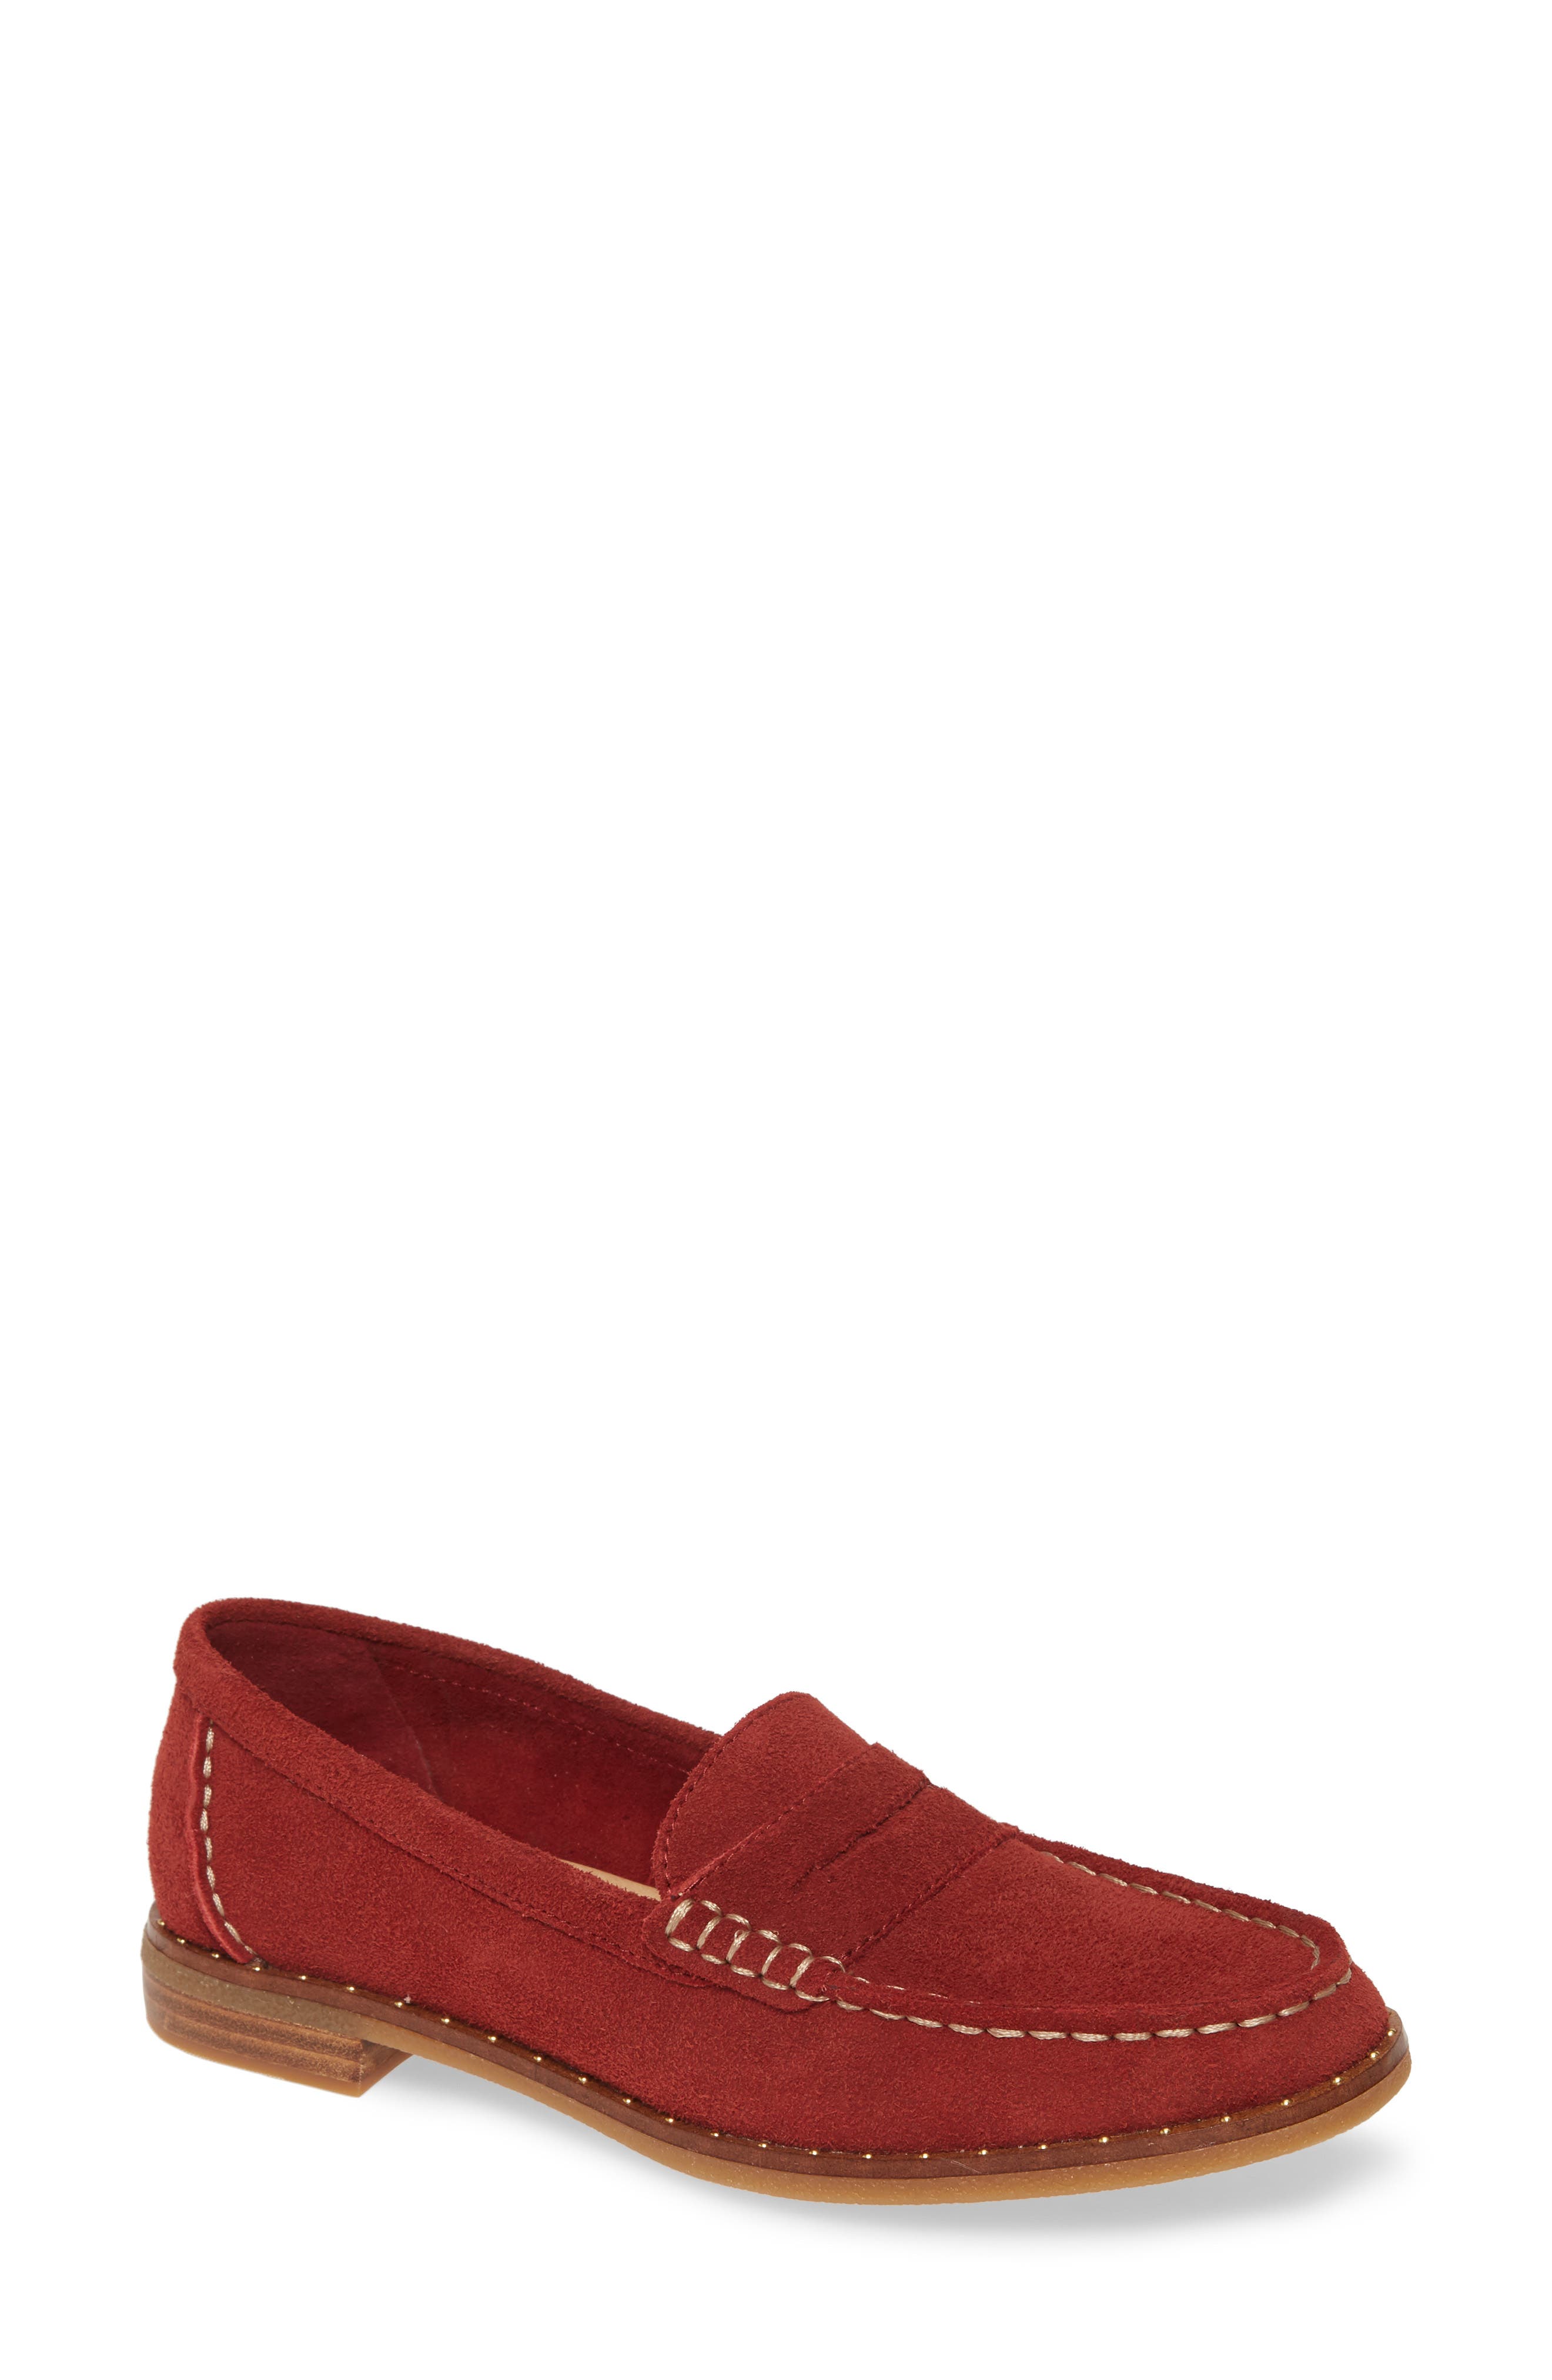 sperry women's shoes nordstrom